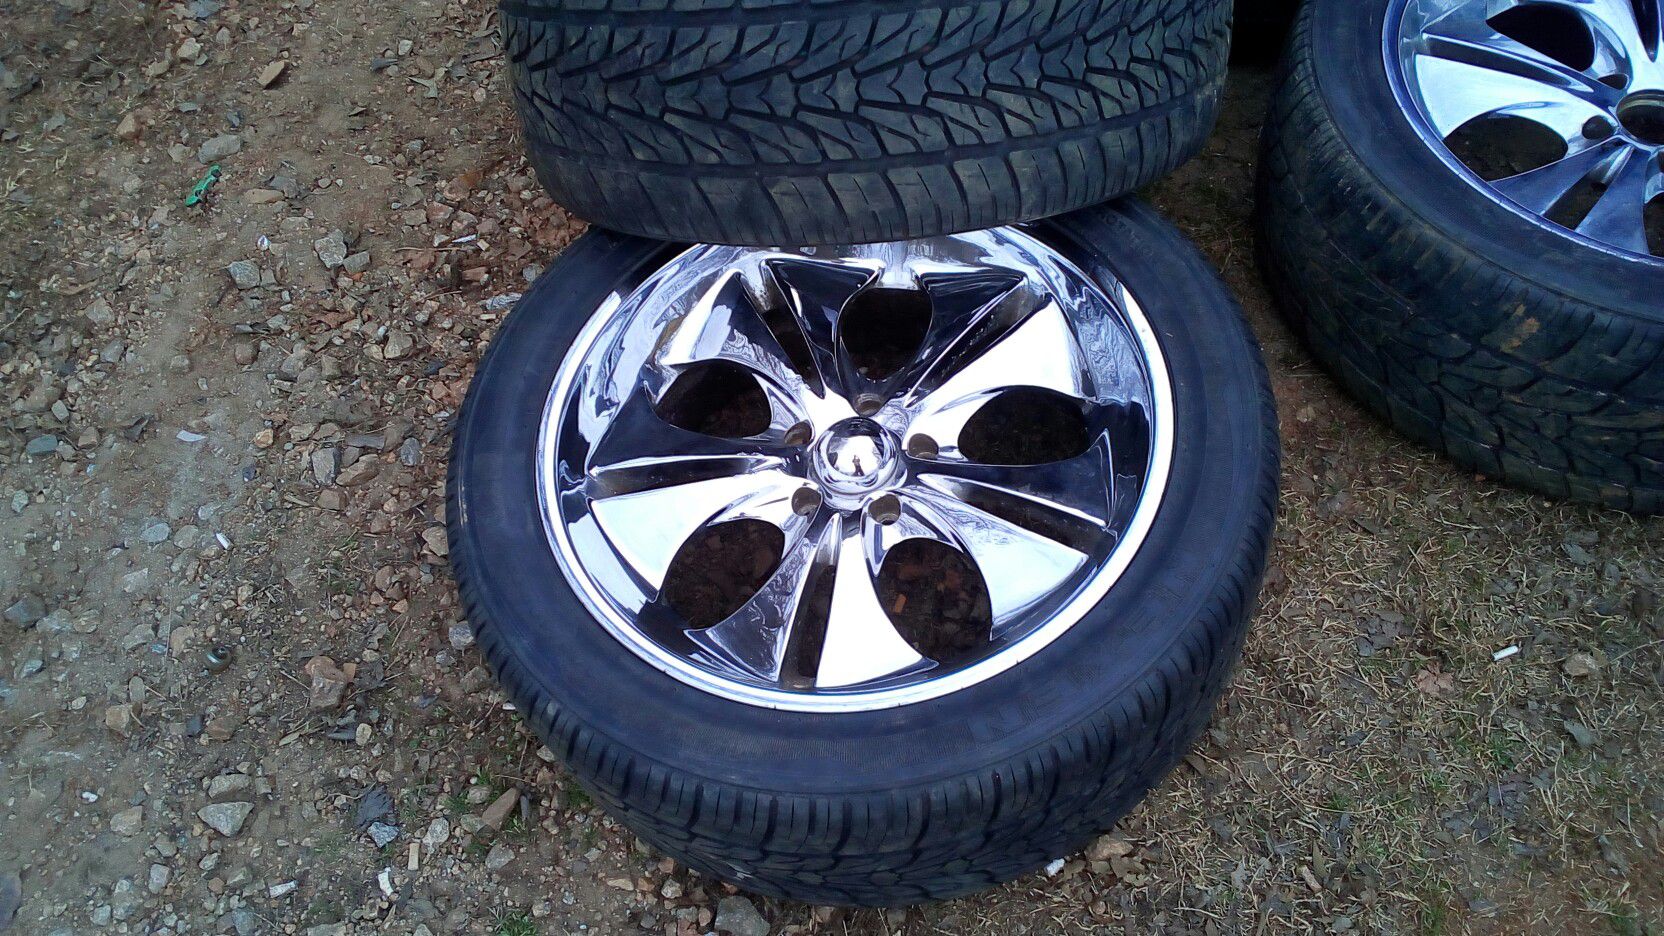 305 40 22 tires rims going with don't no what they fit an one Peel in chrome